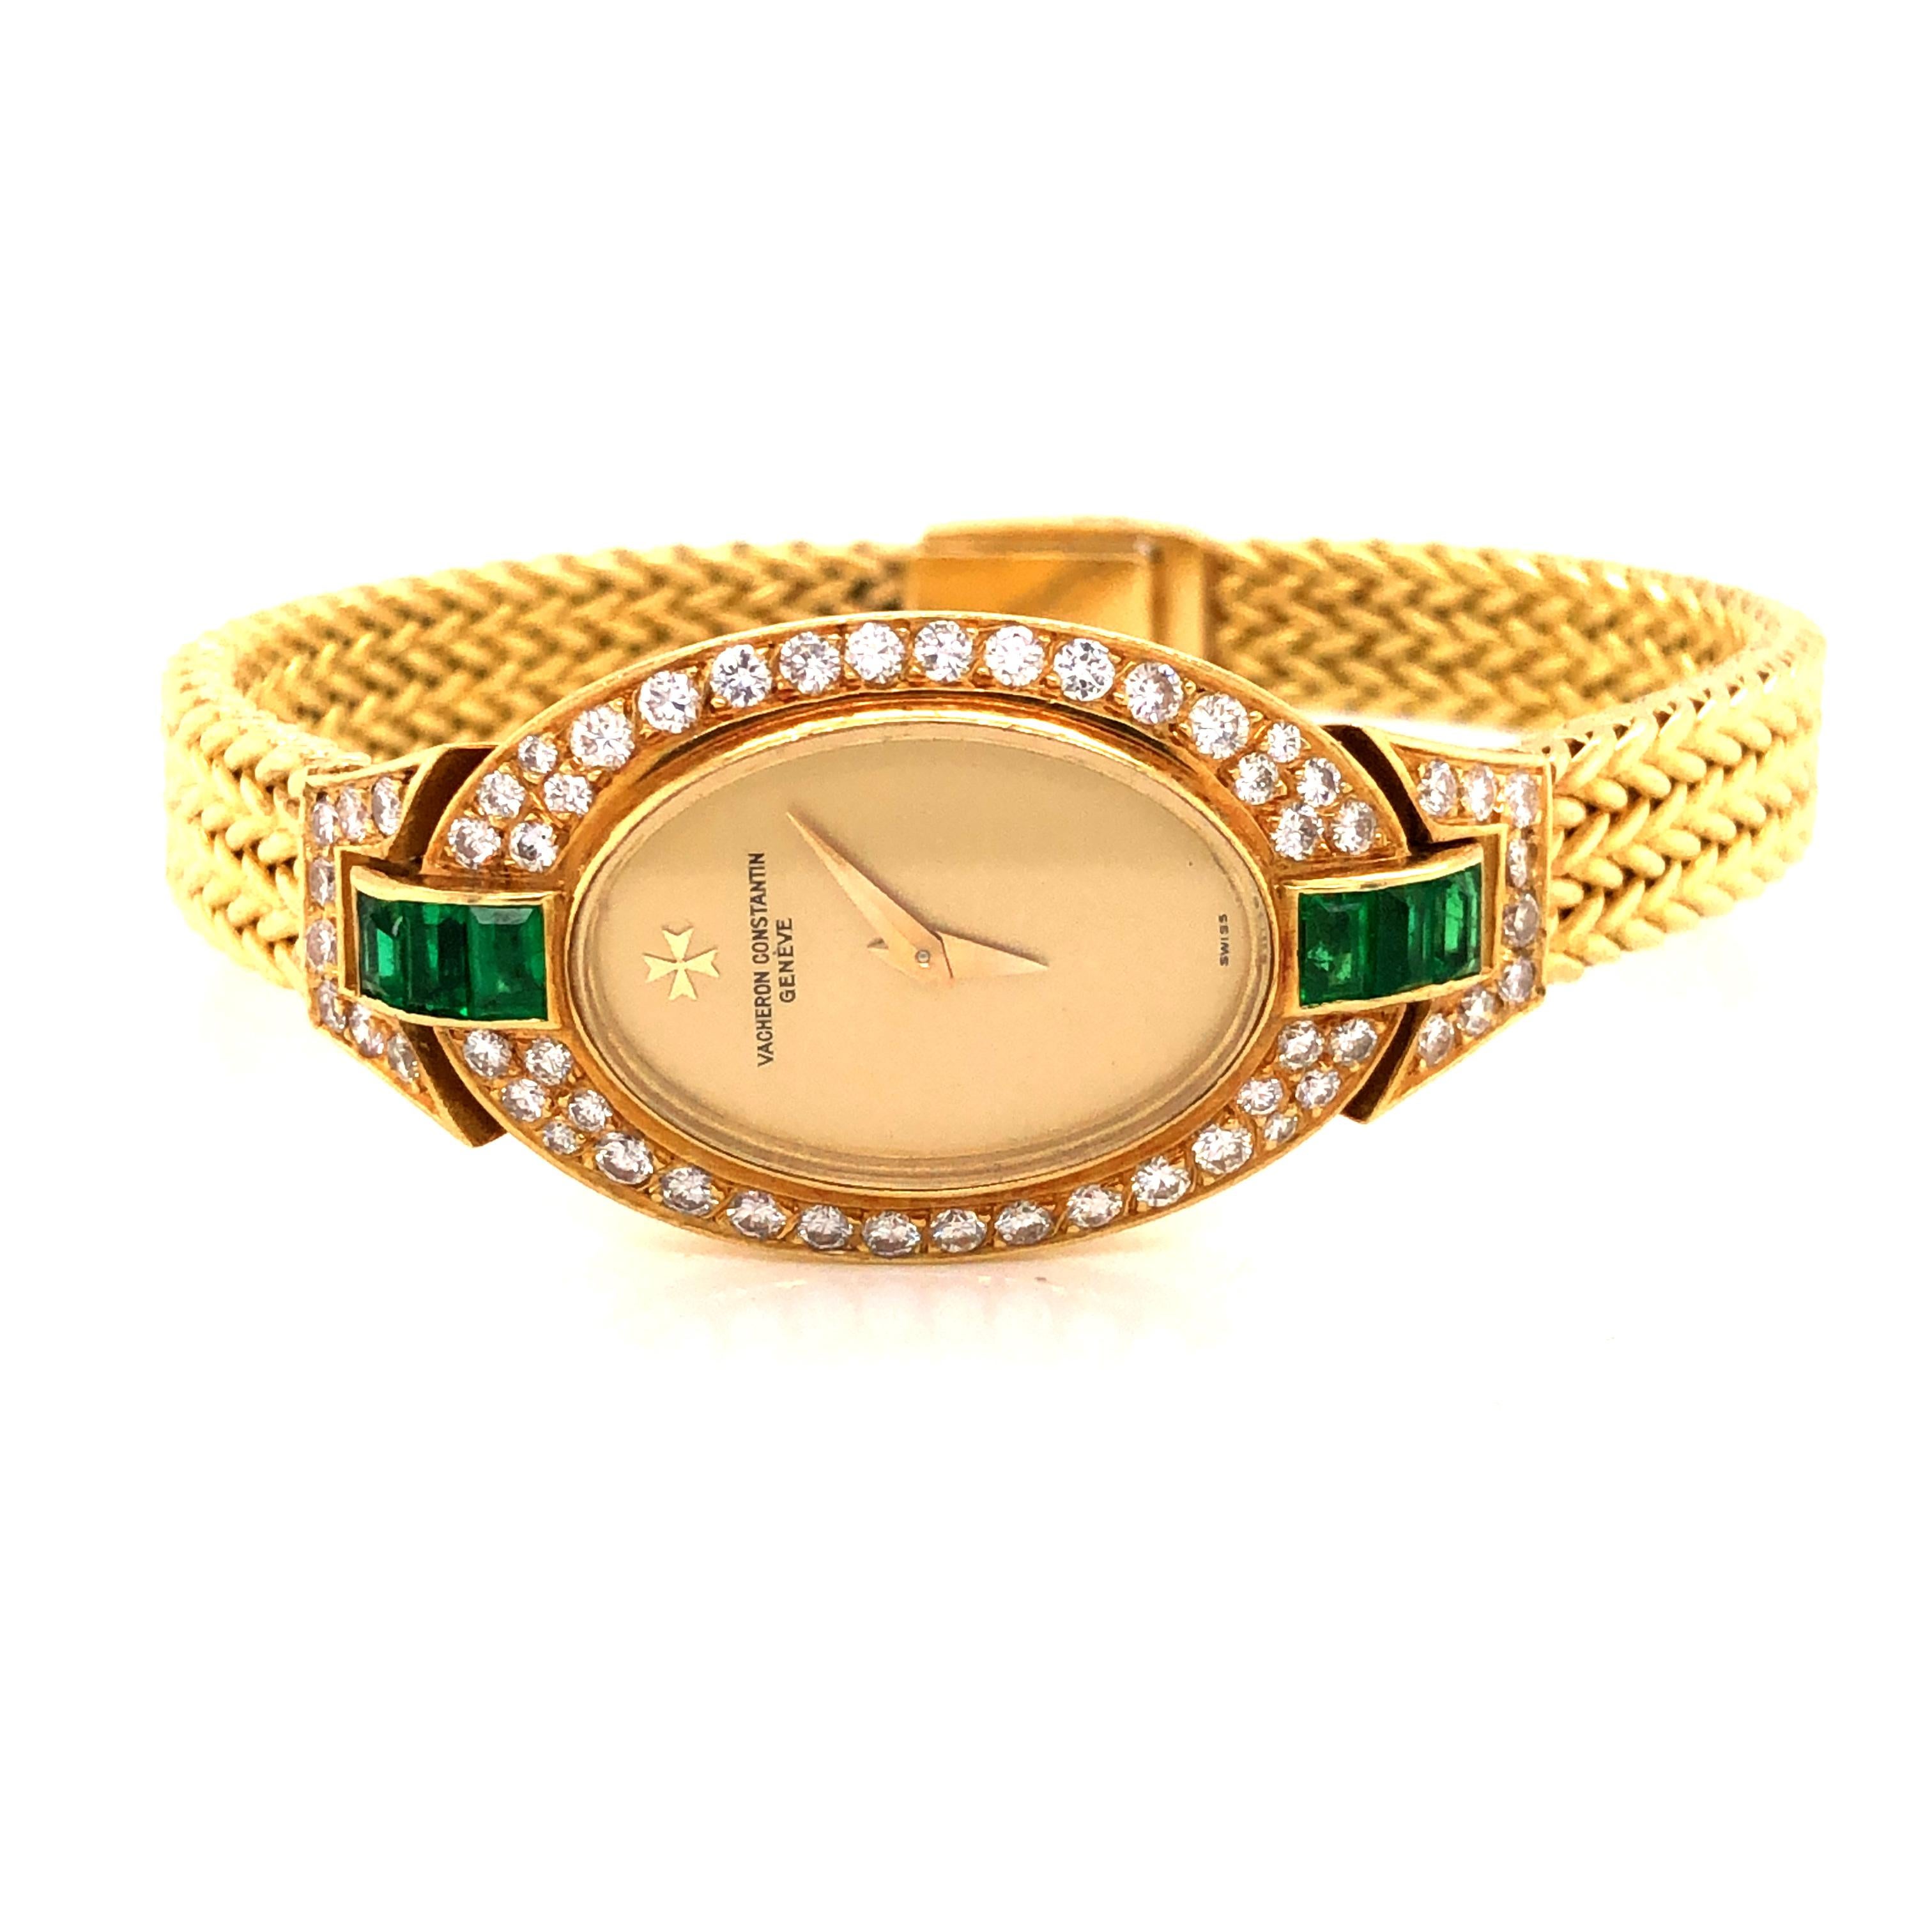 Beautiful vintage watch by Vacheron Constantine.  This timeless creation is crafted in 18k yellow gold. The watch is breathtaking as emerald and diamonds decorate the case. Watch is an oval design with a truly luxurious look. The watch measures 6.5